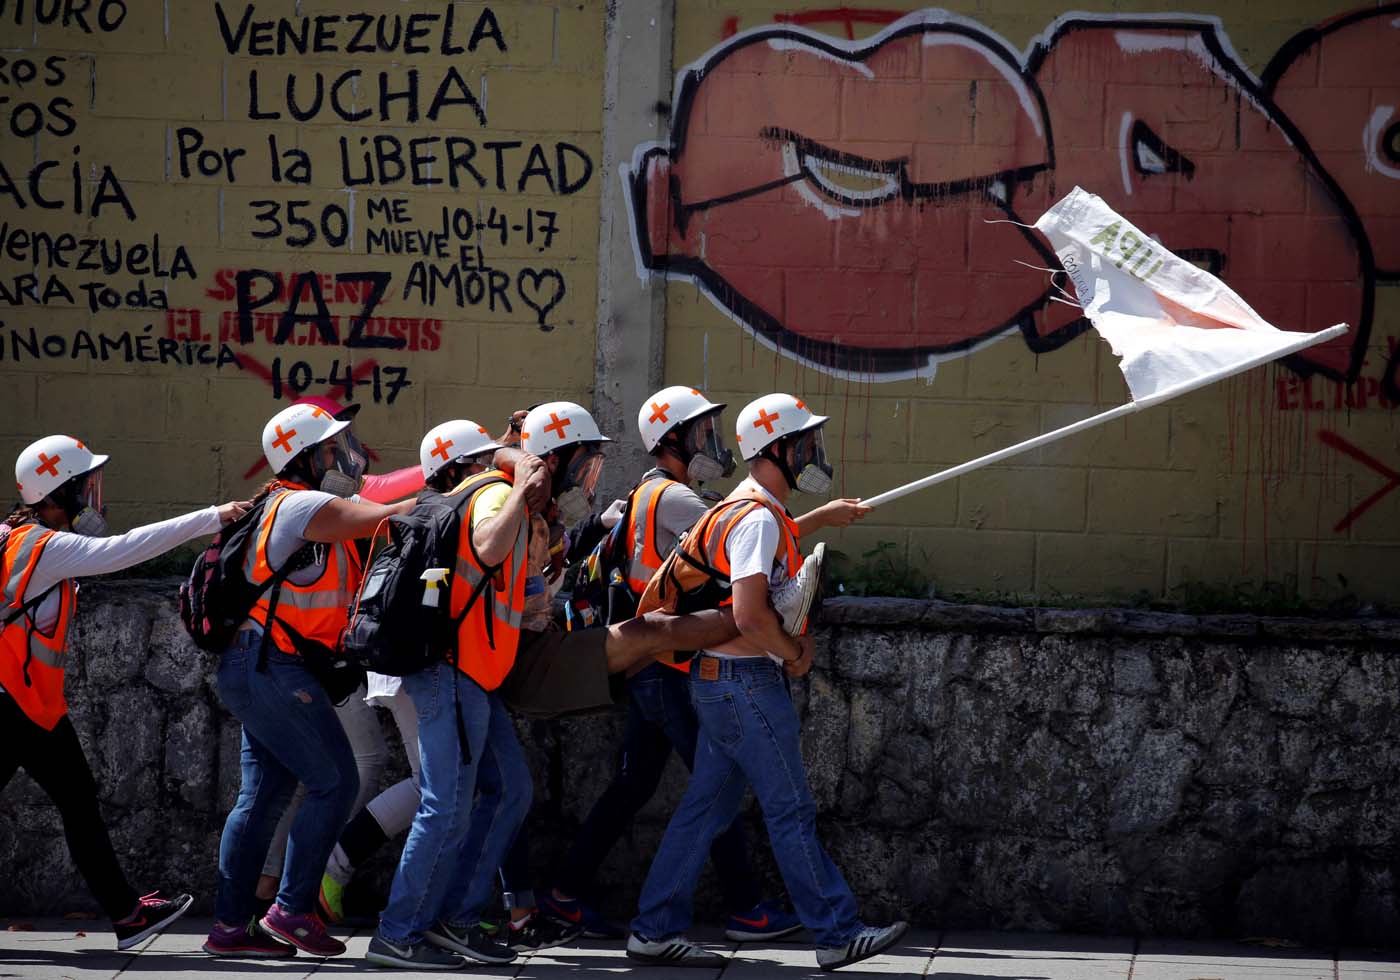 Volunteer members of a primary care response team carry an injured opposition supporter during a protest against Venezuelan President Nicolas Maduro's government in Caracas, Venezuela May 30, 2017. REUTERS/Carlos Barria TPX IMAGES OF THE DAY